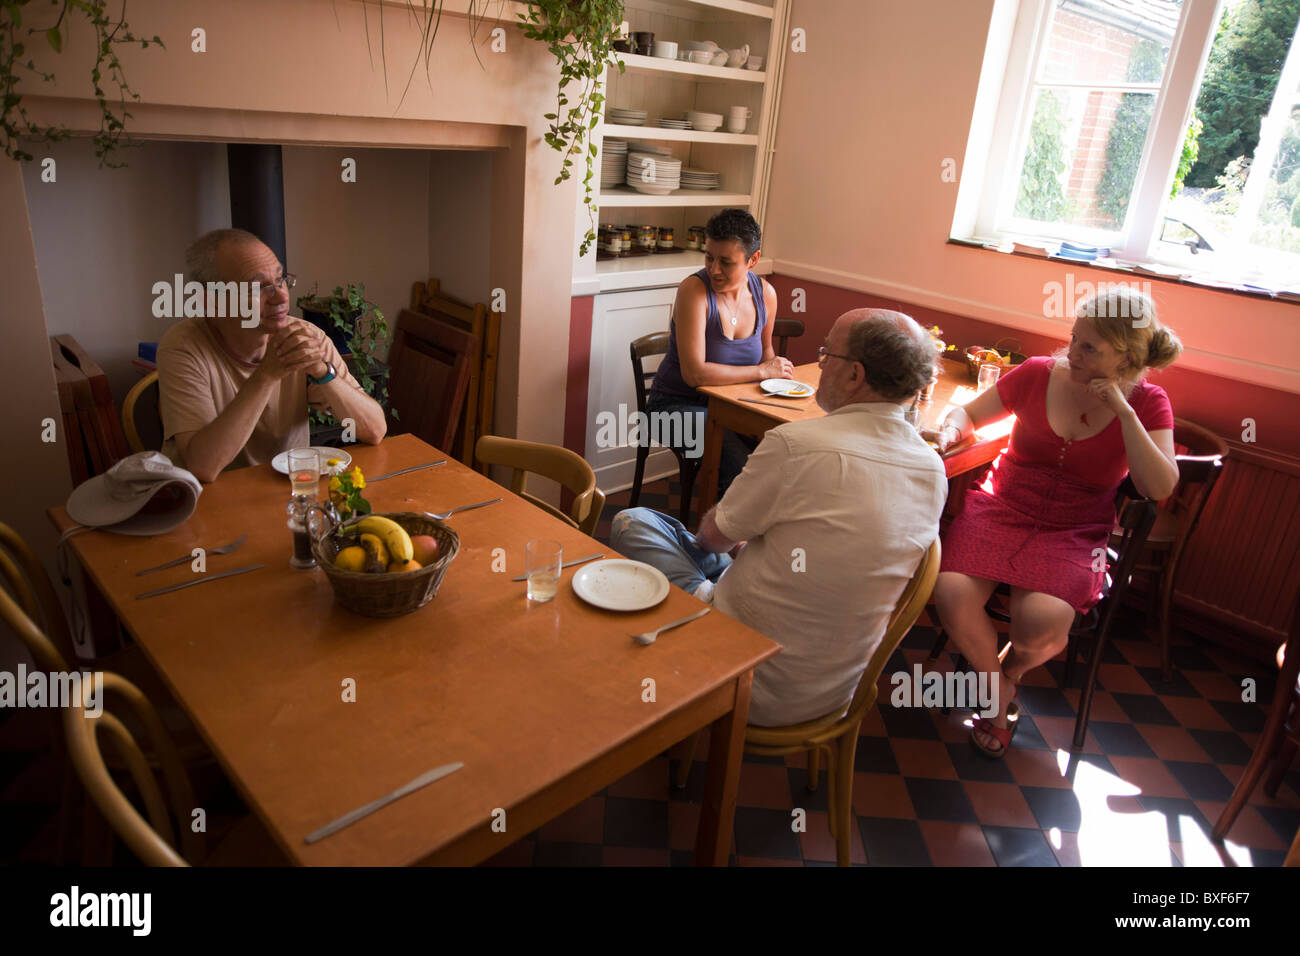 Mealtime for visitors in dining room at the Rivendell Buddhist Retreat Centre, East Sussex, England. Stock Photo